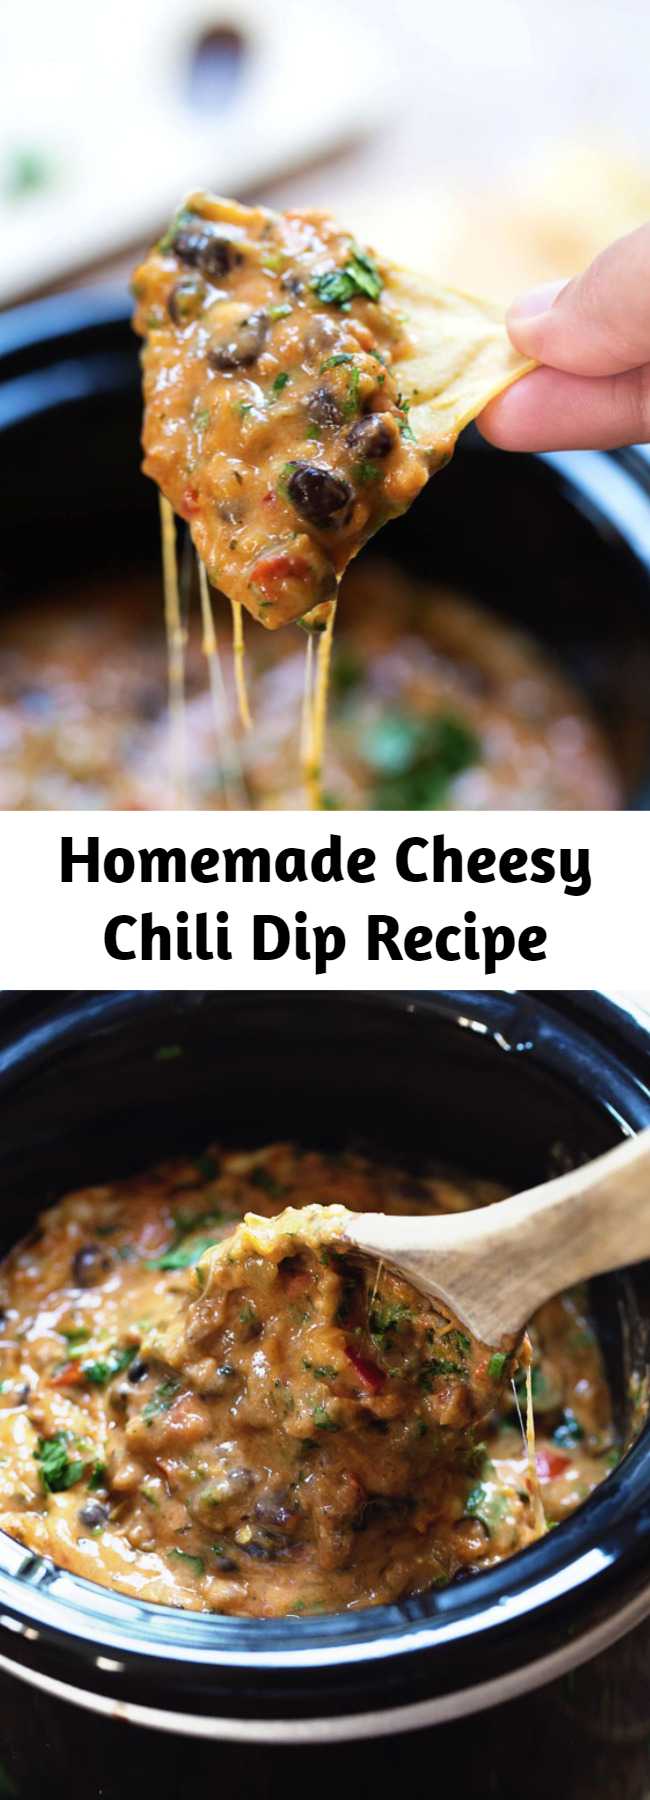 Homemade Cheesy Chili Dip Recipe - This Homemade Cheesy Chili Dip is made without the processed cheese! Just homemade spicy chili and creamy cheese sauce. Deeeelish!